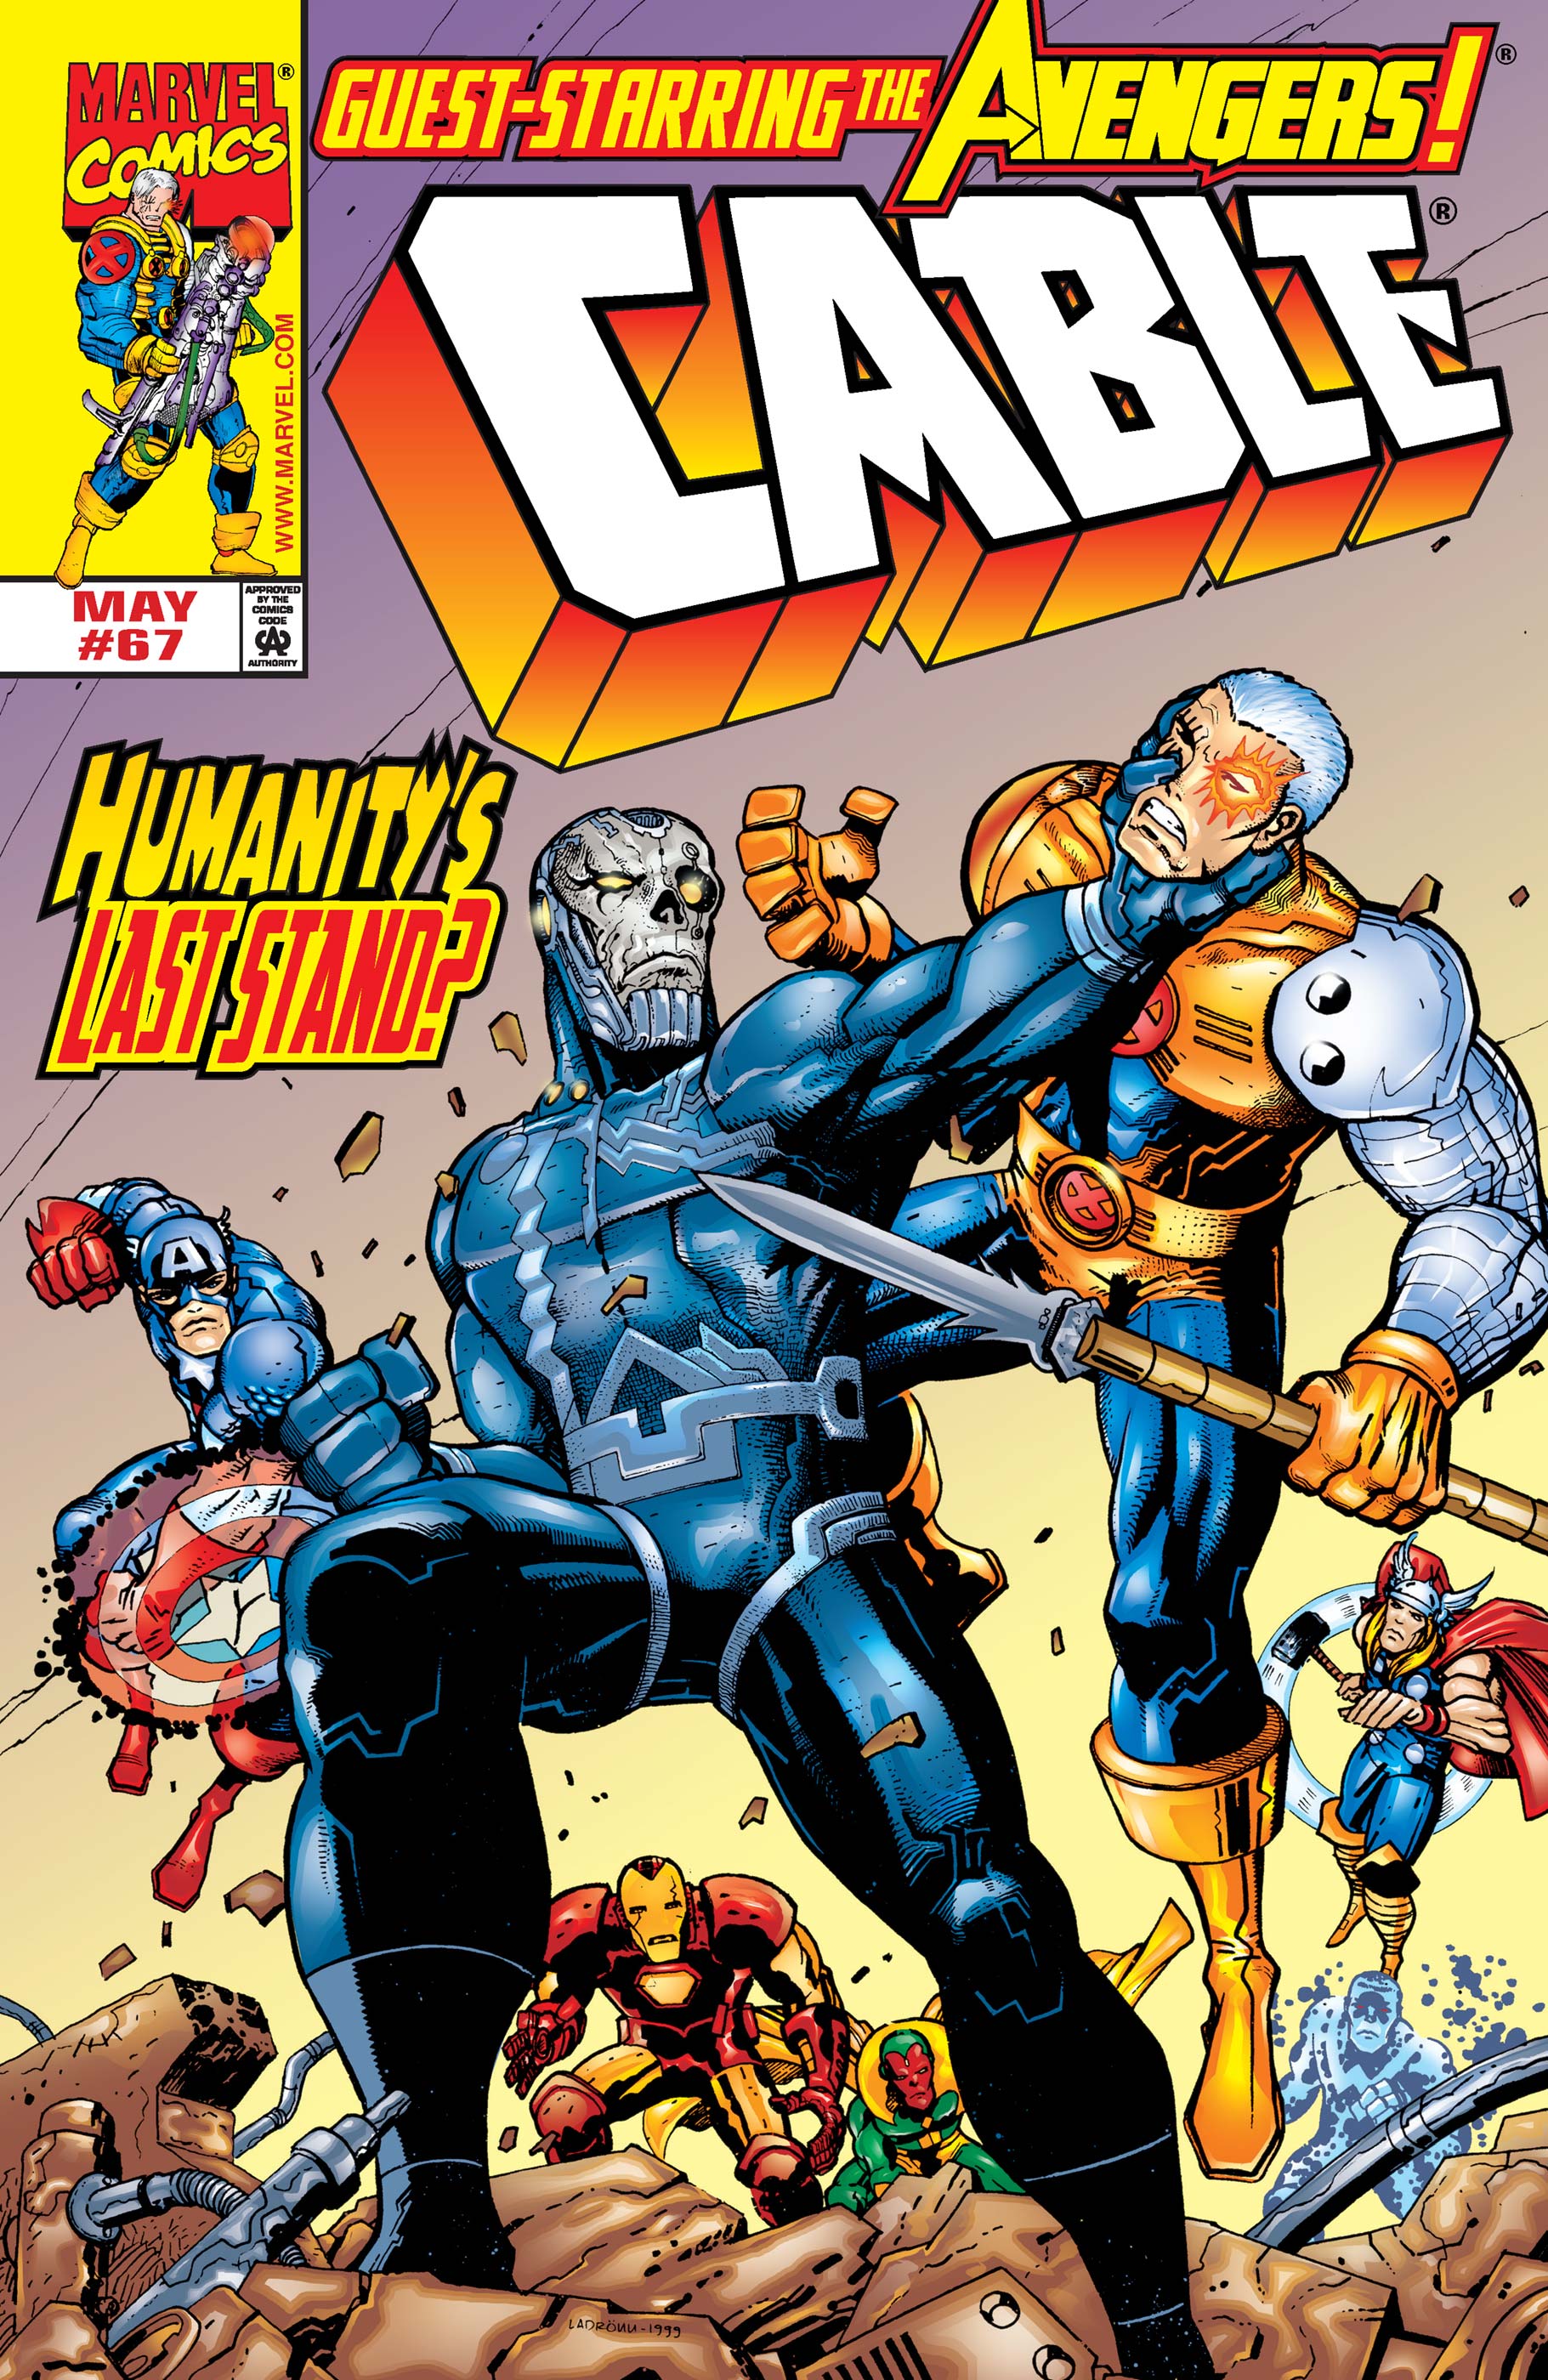 Cable (1993) #67